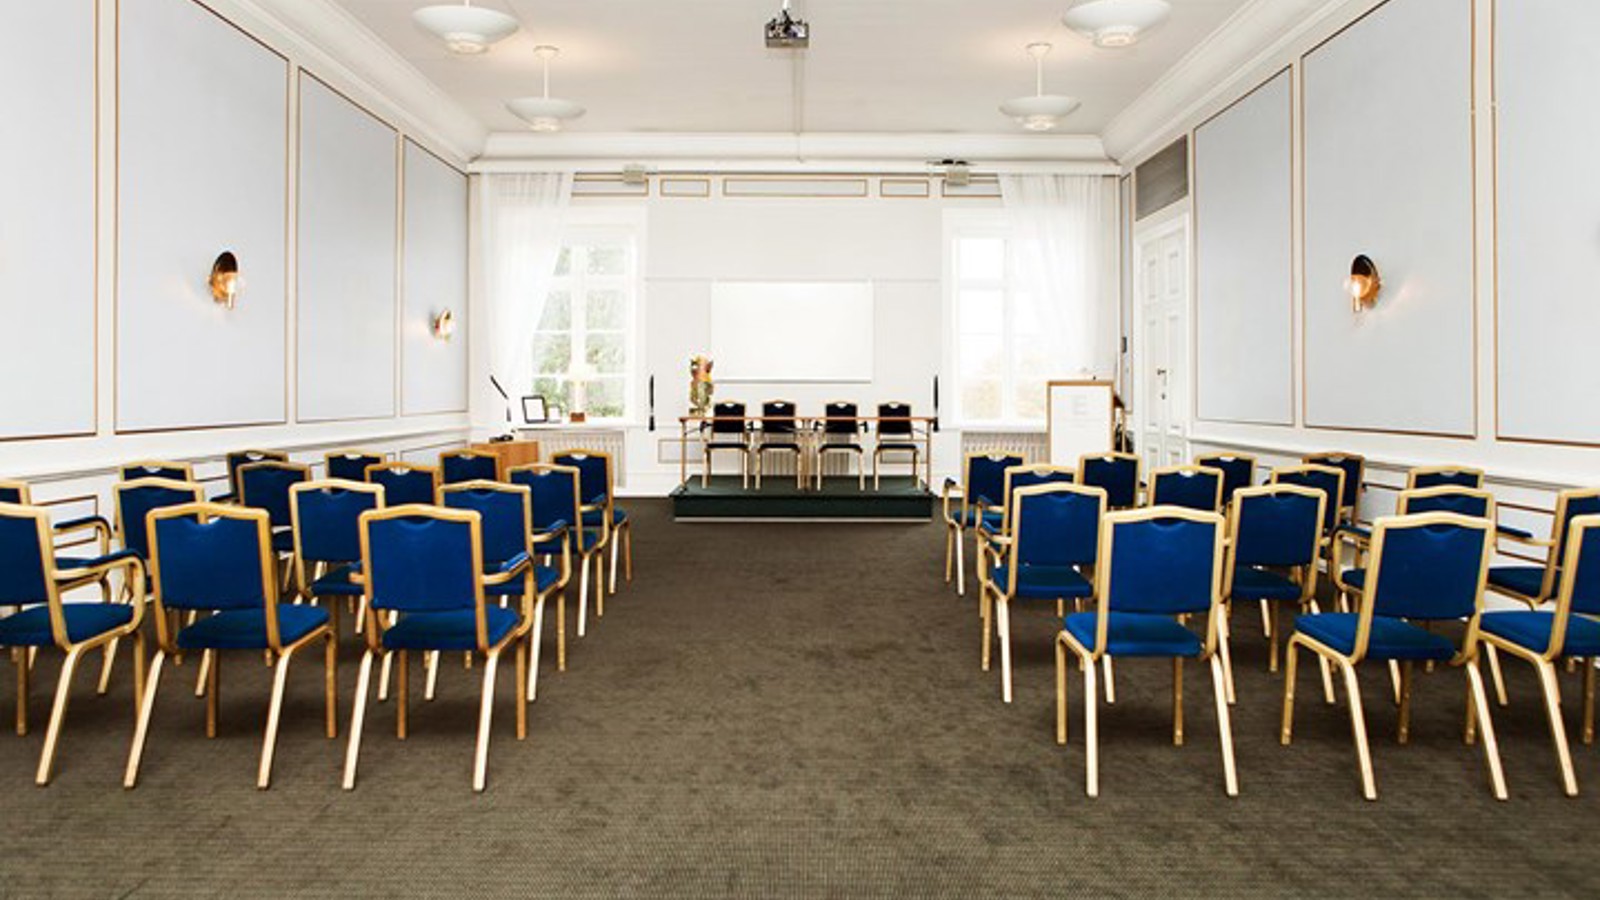 Conference room with cinema seating, light blue walls and blue chairs